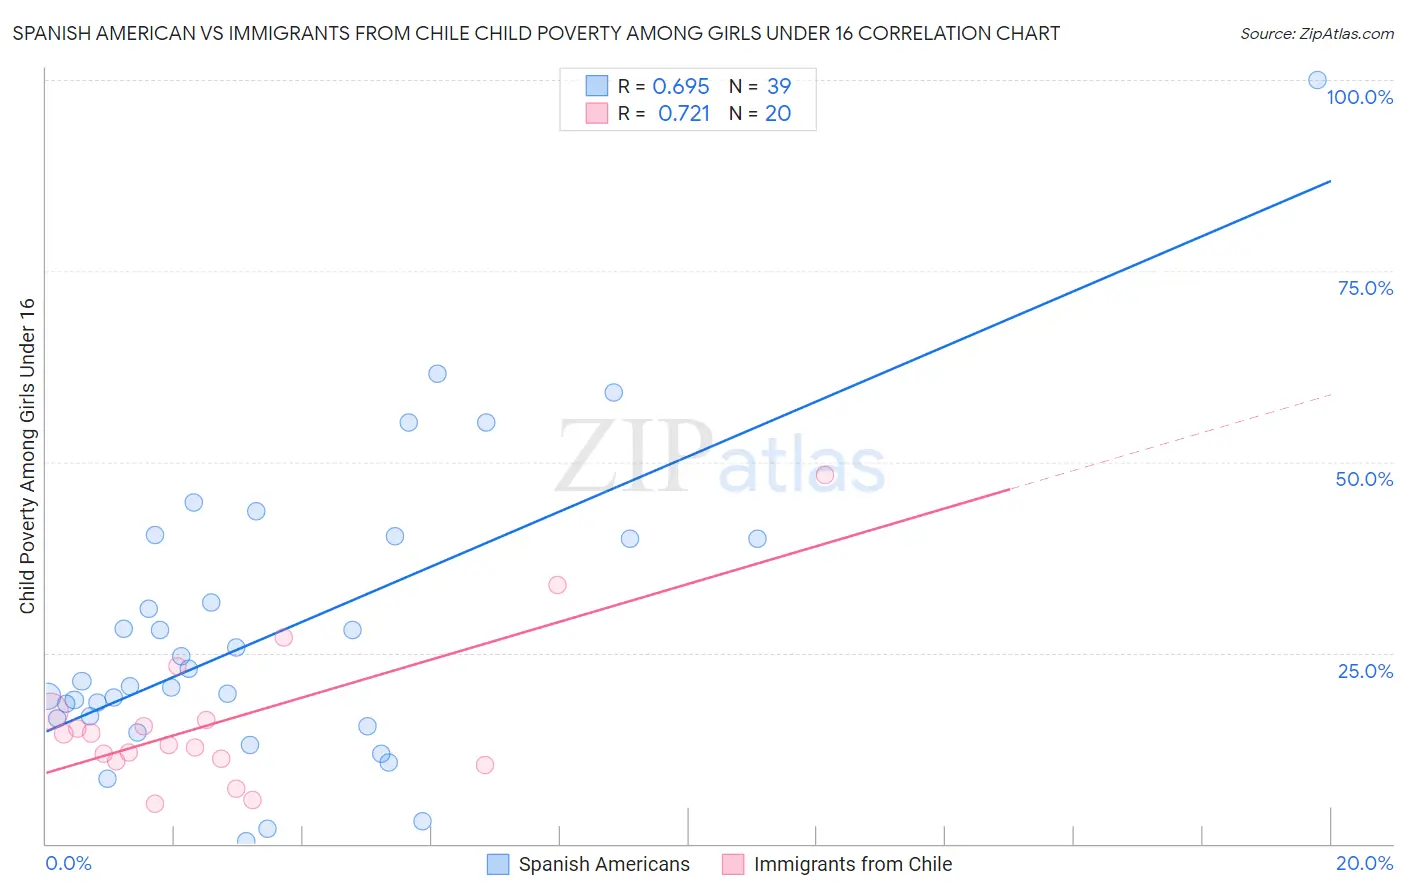 Spanish American vs Immigrants from Chile Child Poverty Among Girls Under 16